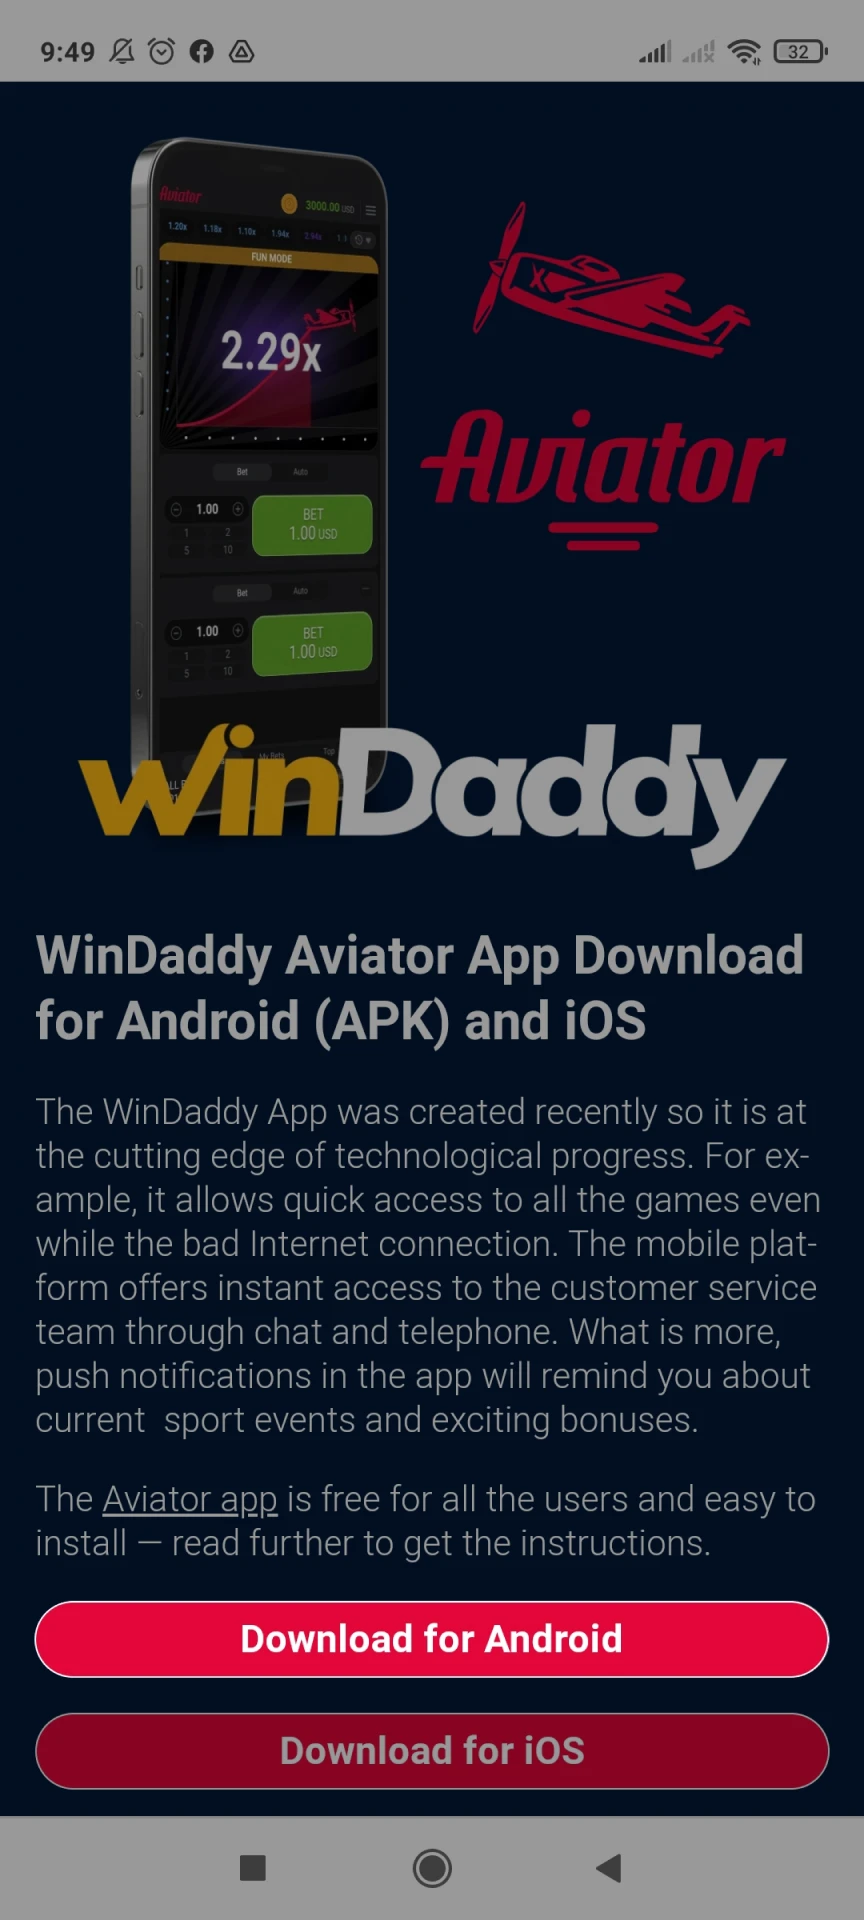 Go to the WinDaddy download page for Android.